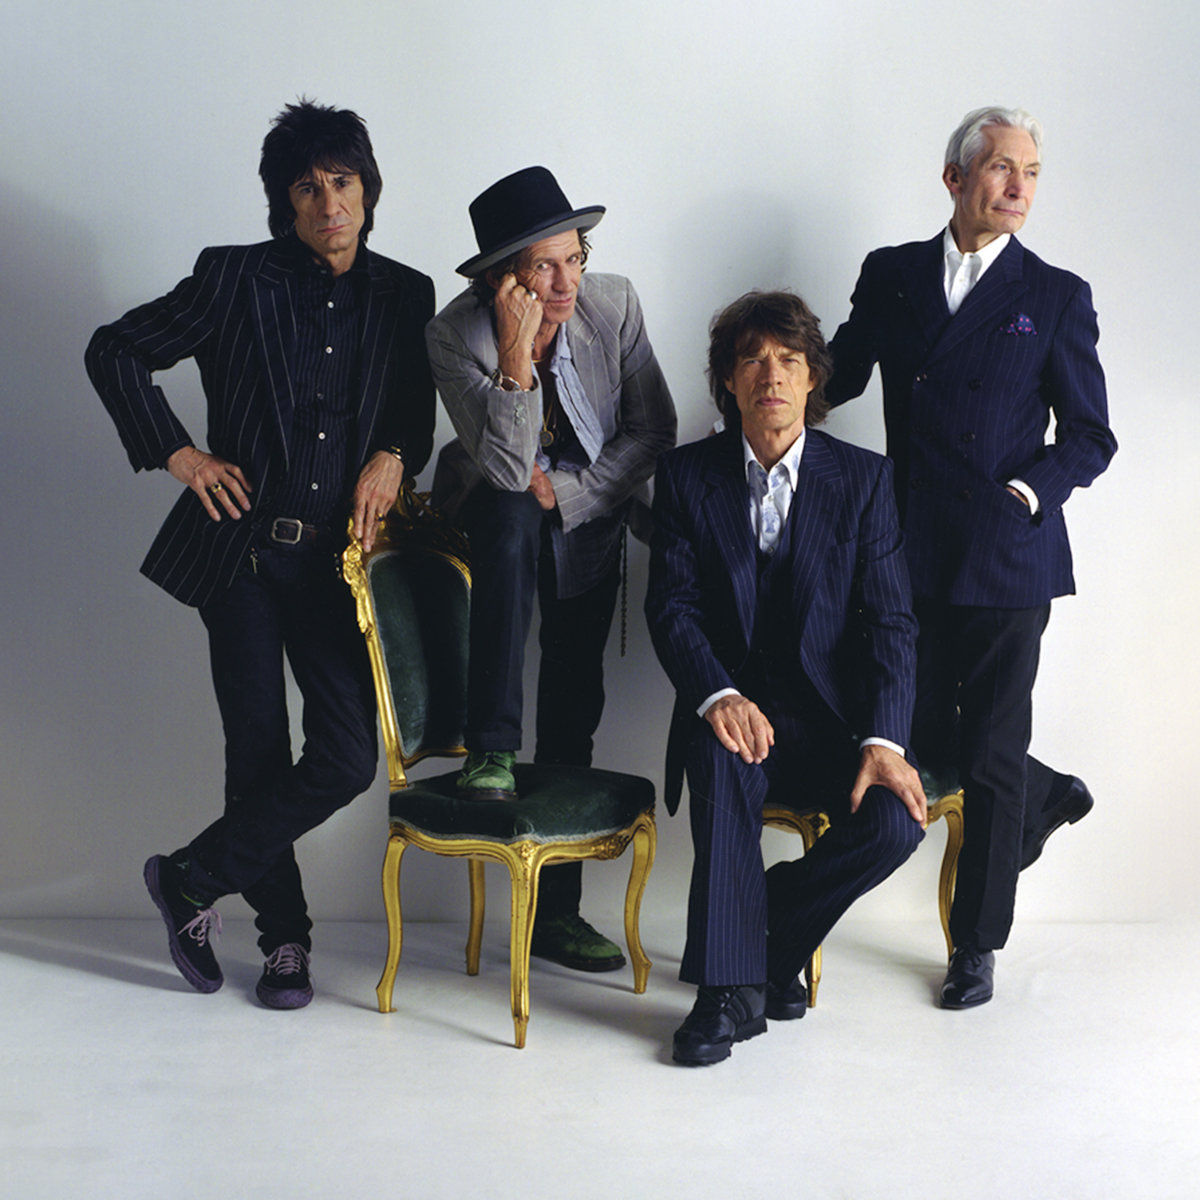 Rolling Stones Announce ‘Live at the El Mocambo’ Album to be Released on May 13